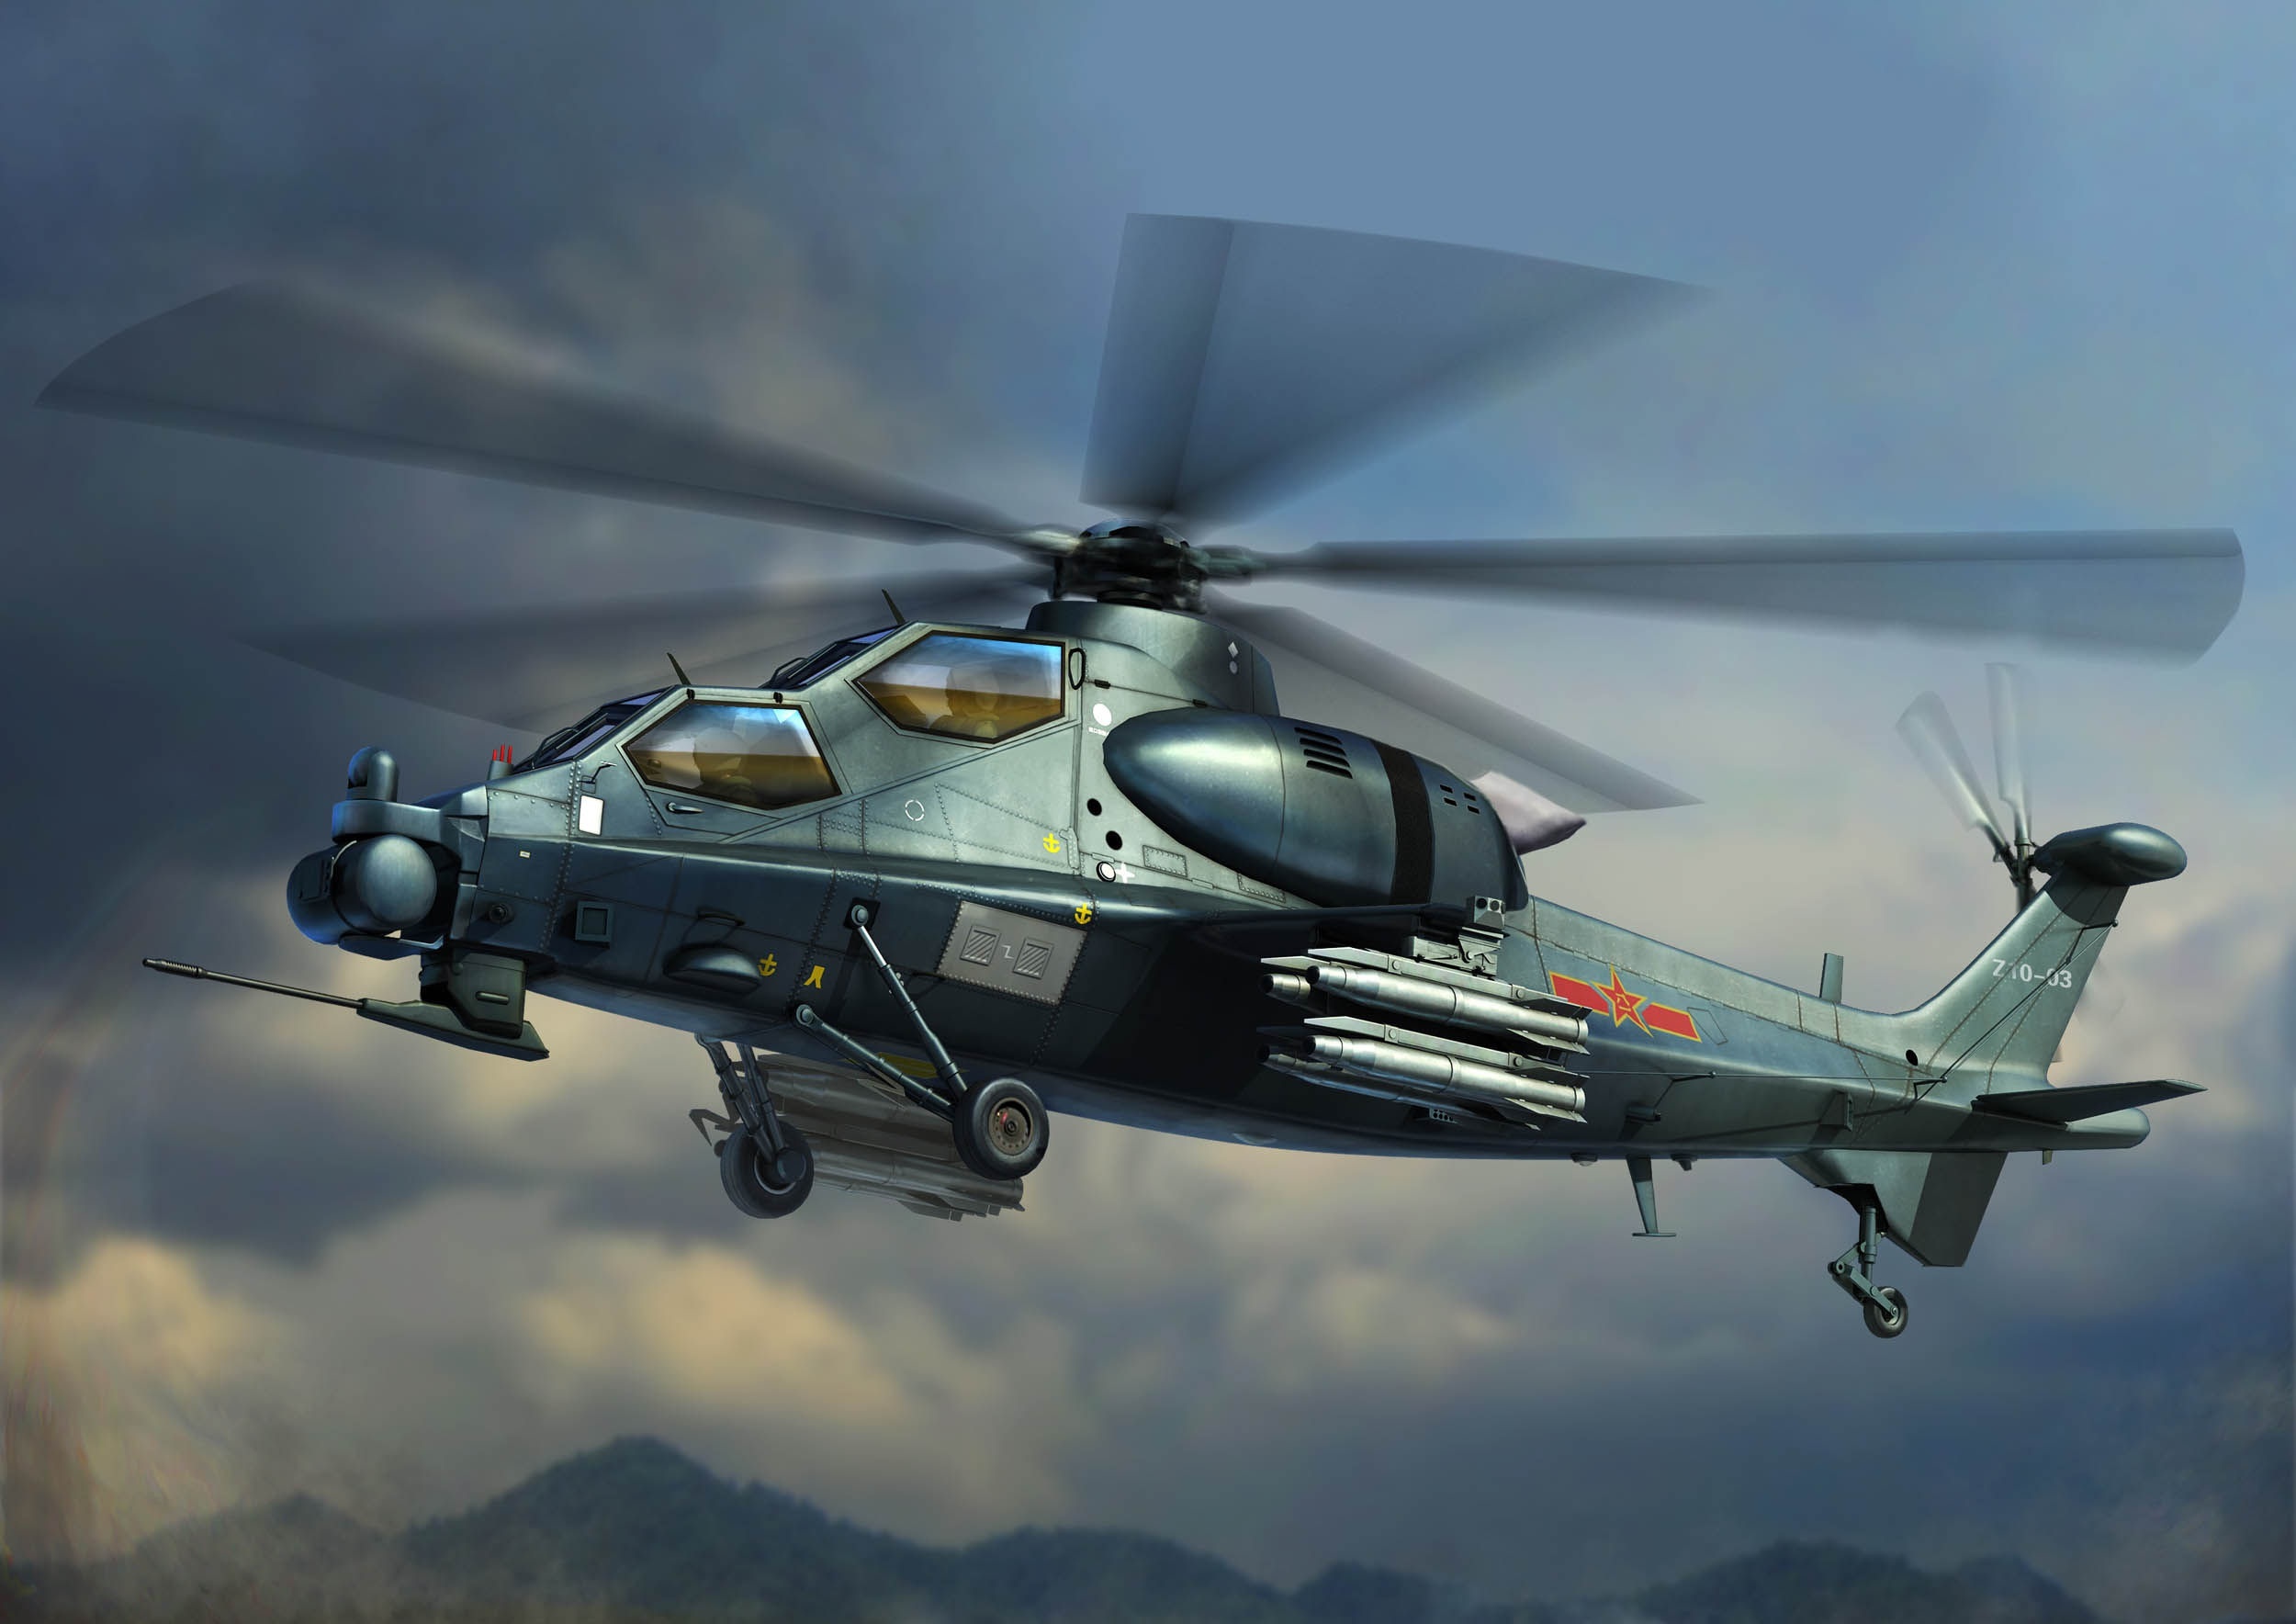 CAIC Z-10 HD Wallpapers and Backgrounds 2500x1770